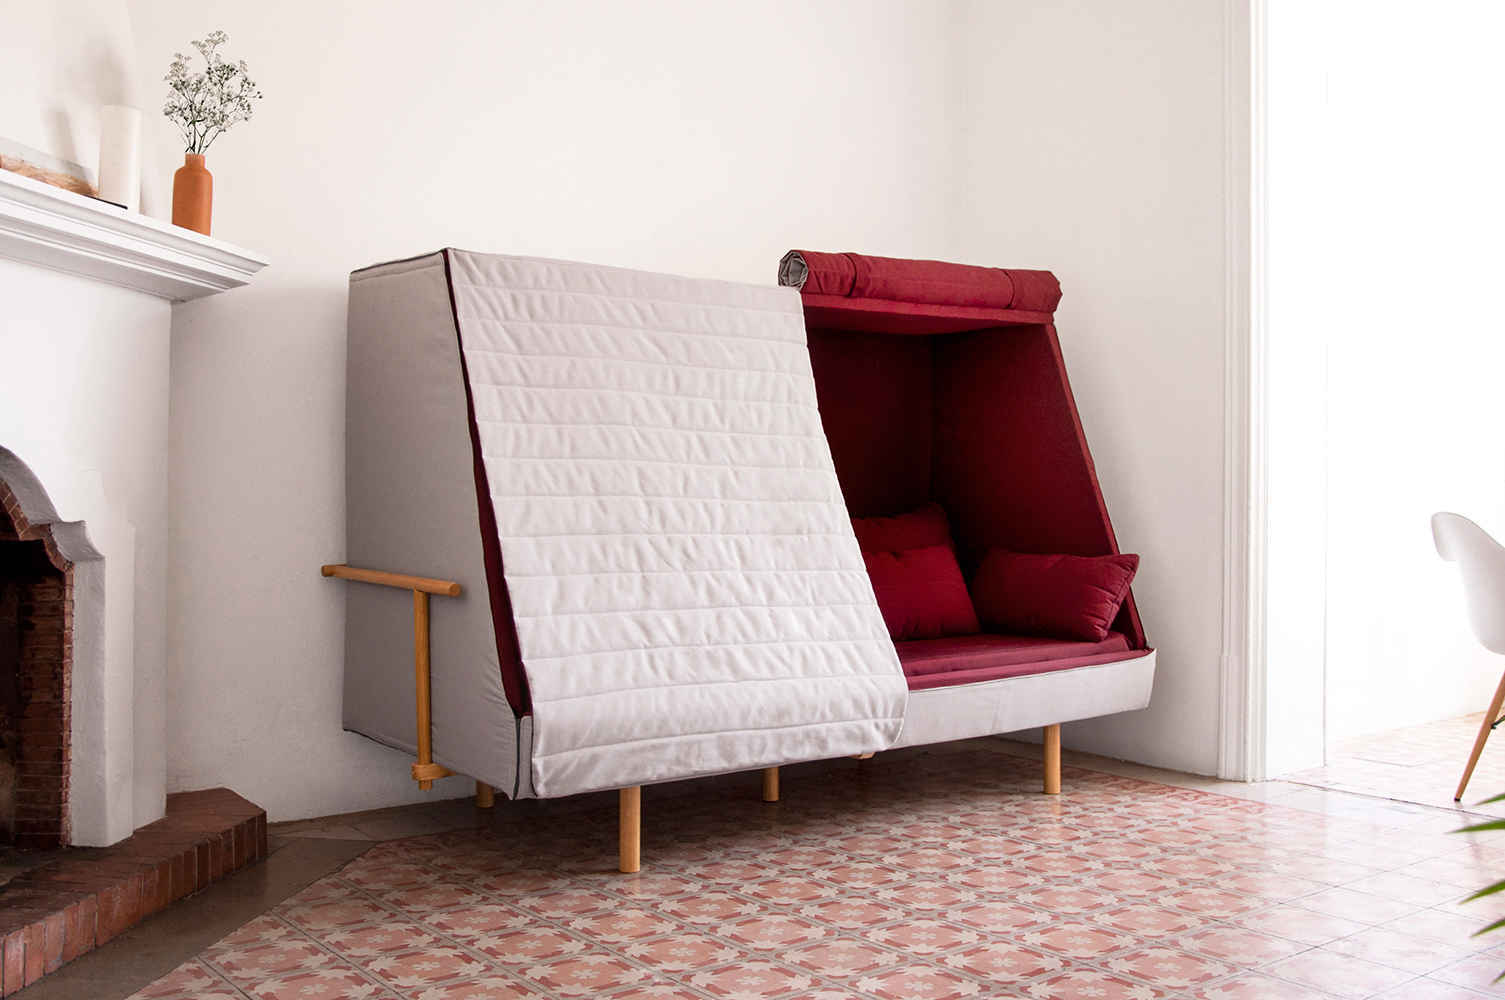 10 space-saving furniture designs for small homes